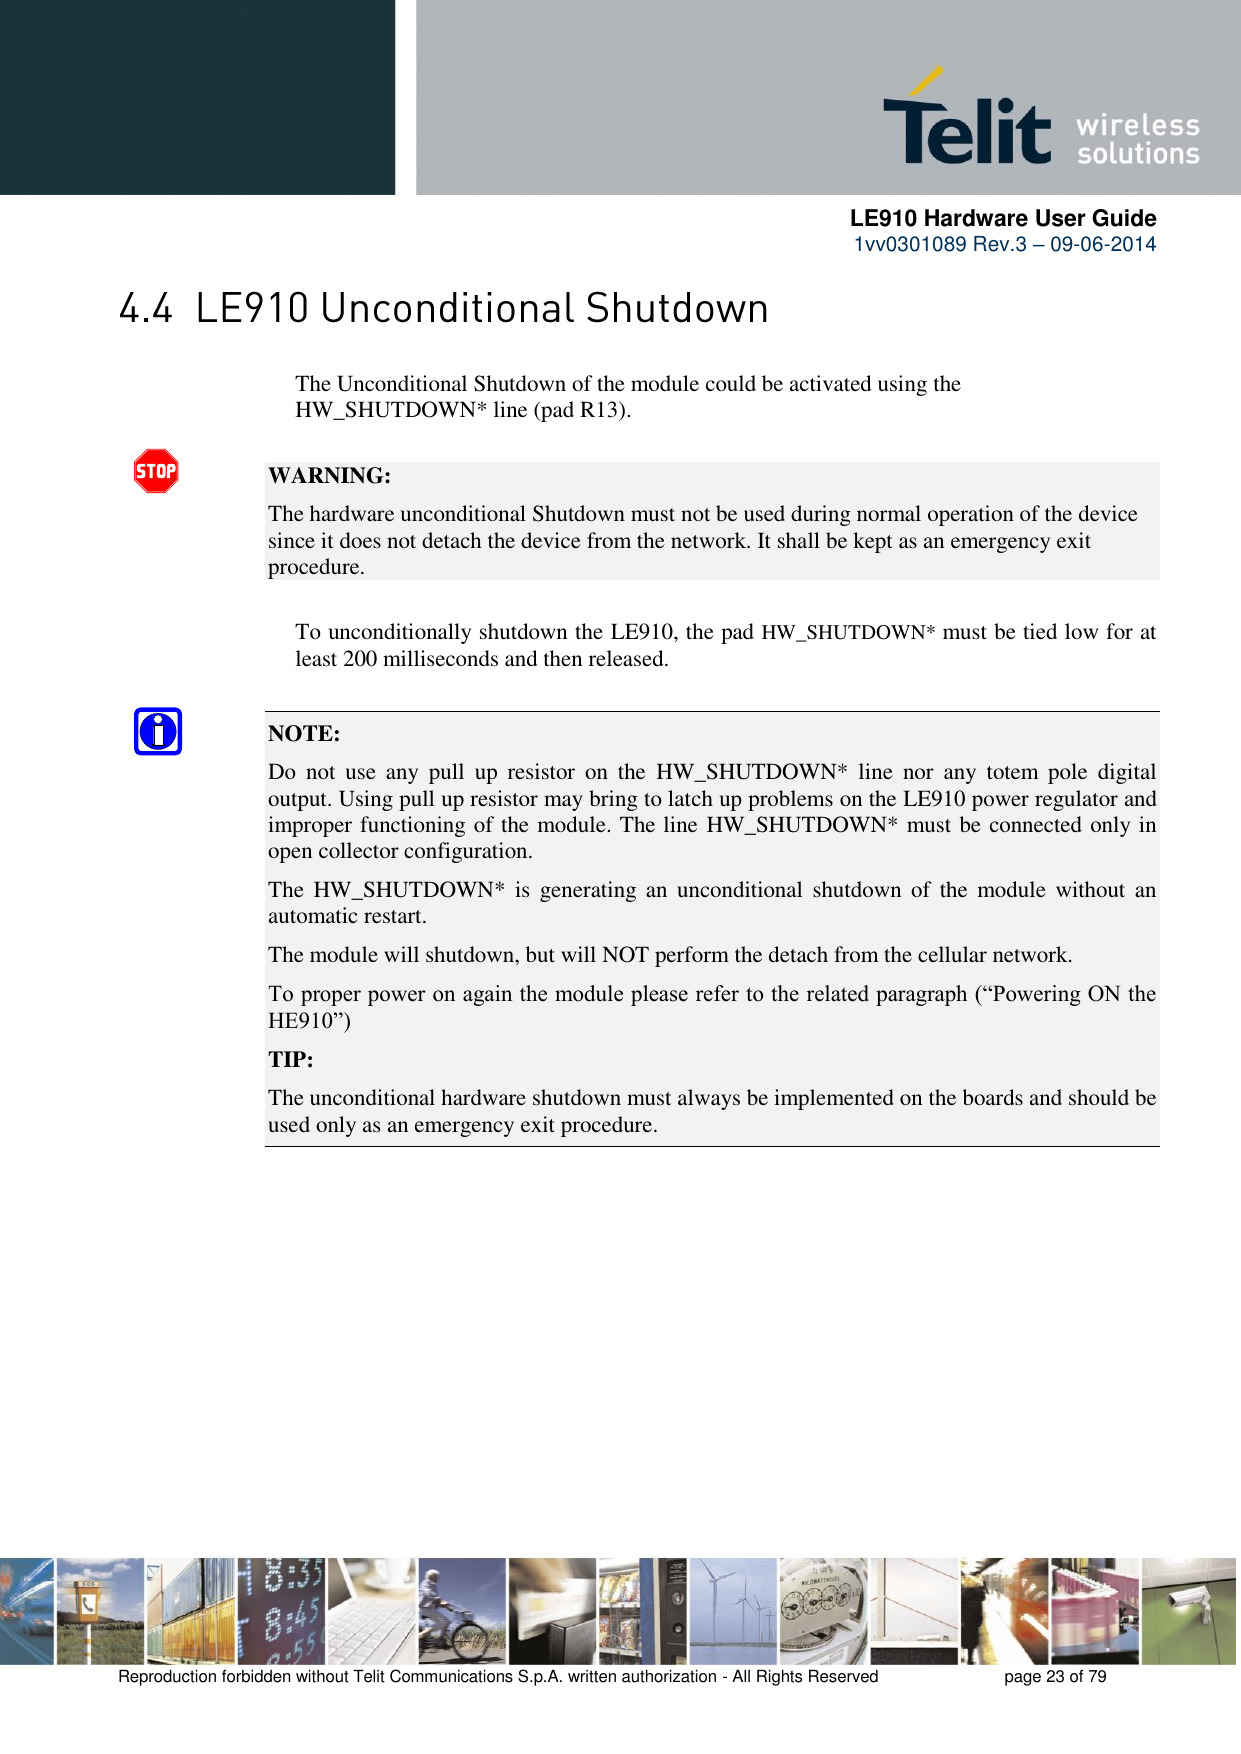      LE910 Hardware User Guide 1vv0301089 Rev.3 – 09-06-2014    Reproduction forbidden without Telit Communications S.p.A. written authorization - All Rights Reserved    page 23 of 79   The Unconditional Shutdown of the module could be activated using the      HW_SHUTDOWN* line (pad R13).  WARNING: The hardware unconditional Shutdown must not be used during normal operation of the device since it does not detach the device from the network. It shall be kept as an emergency exit procedure.      To unconditionally shutdown the LE910, the pad HW_SHUTDOWN* must be tied low for at     least 200 milliseconds and then released.  NOTE:  Do  not  use  any  pull  up  resistor  on  the  HW_SHUTDOWN*  line  nor  any  totem  pole  digital output. Using pull up resistor may bring to latch up problems on the LE910 power regulator and improper functioning of the module. The line HW_SHUTDOWN* must be connected only in open collector configuration. The  HW_SHUTDOWN* is  generating  an  unconditional shutdown  of  the  module  without  an automatic restart. The module will shutdown, but will NOT perform the detach from the cellular network. To proper power on again the module please refer to the related paragraph (“Powering ON the HE910”) TIP: The unconditional hardware shutdown must always be implemented on the boards and should be used only as an emergency exit procedure. 